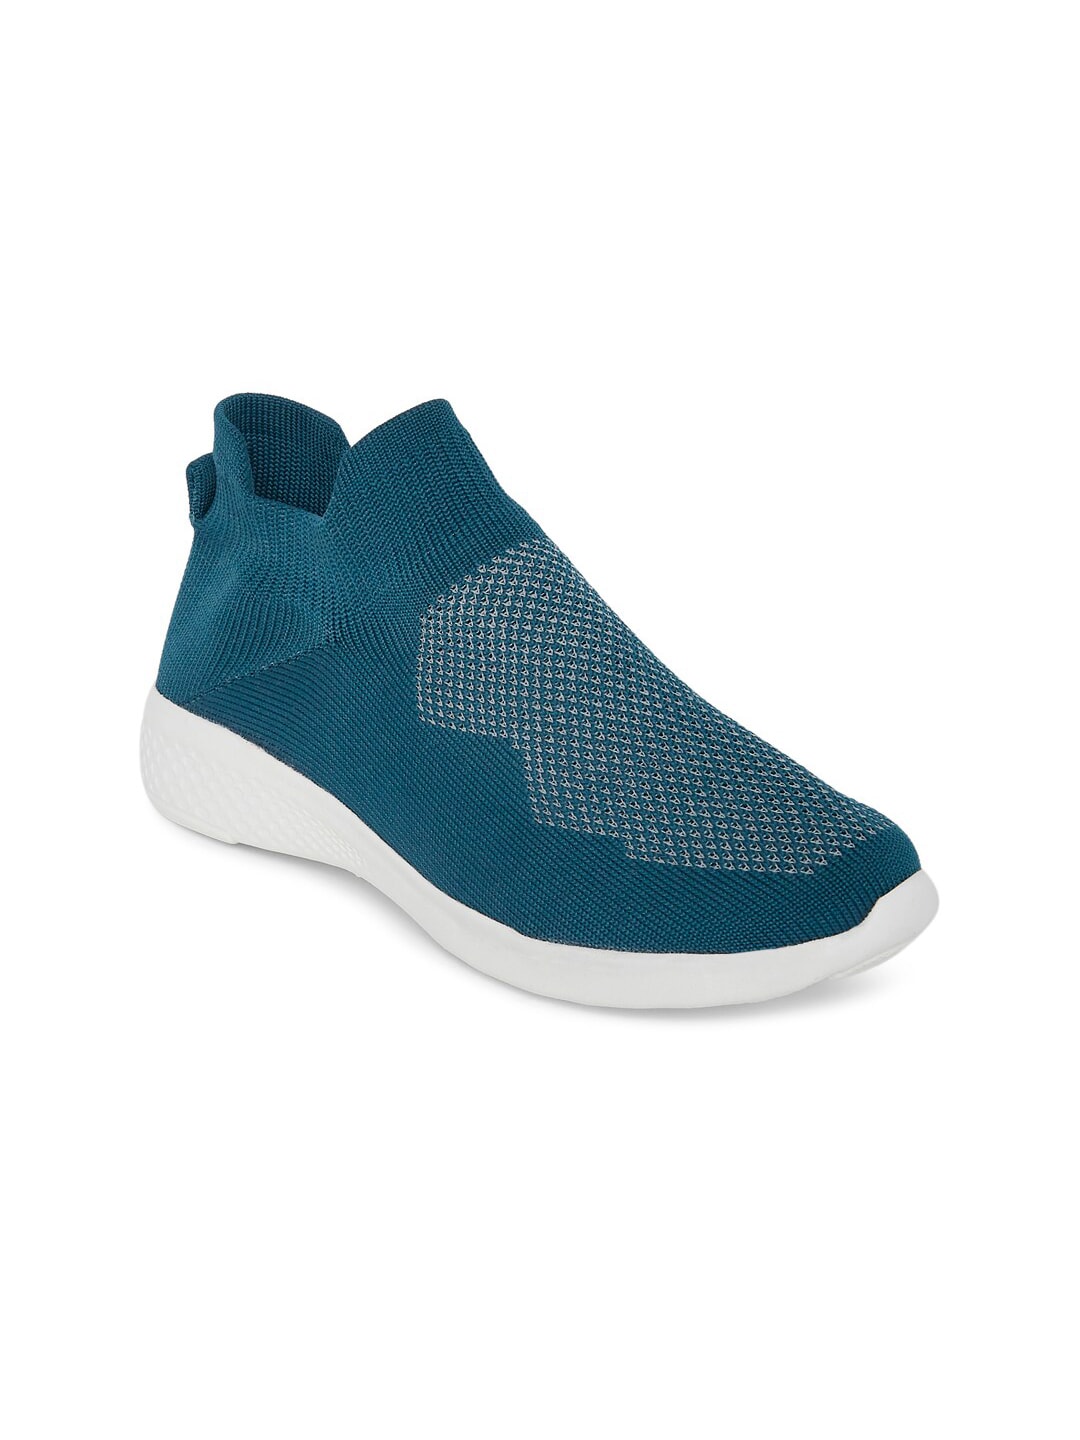 People Women Teal Mesh Running Non-Marking Shoes Price in India